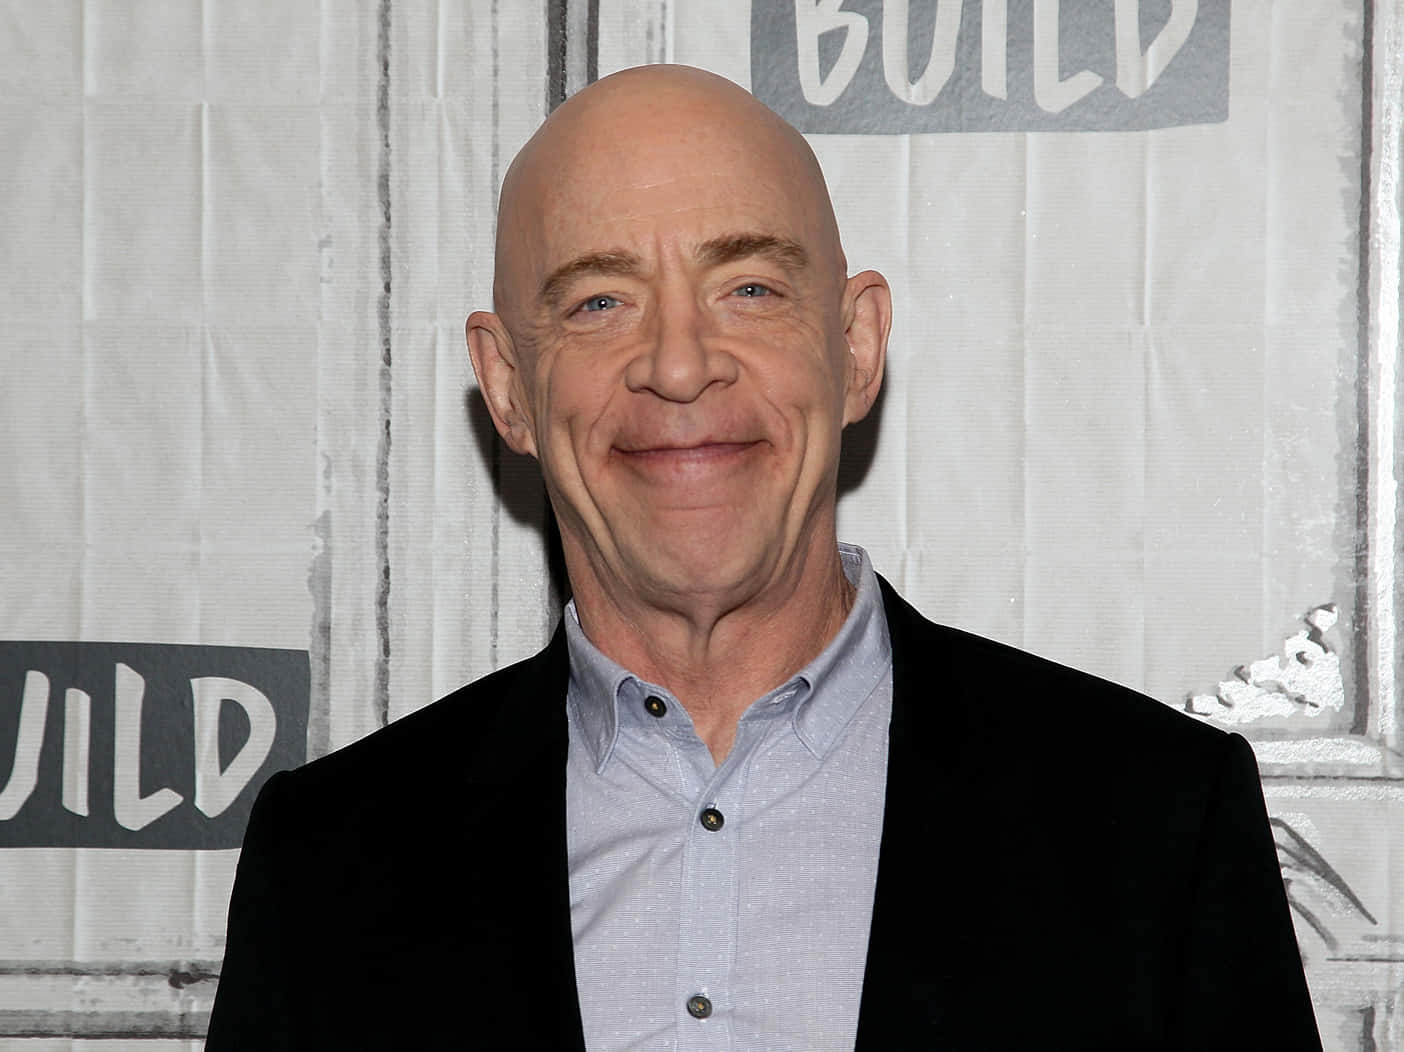 Award-winning Actor J.k. Simmons In A Poised Stance. Wallpaper